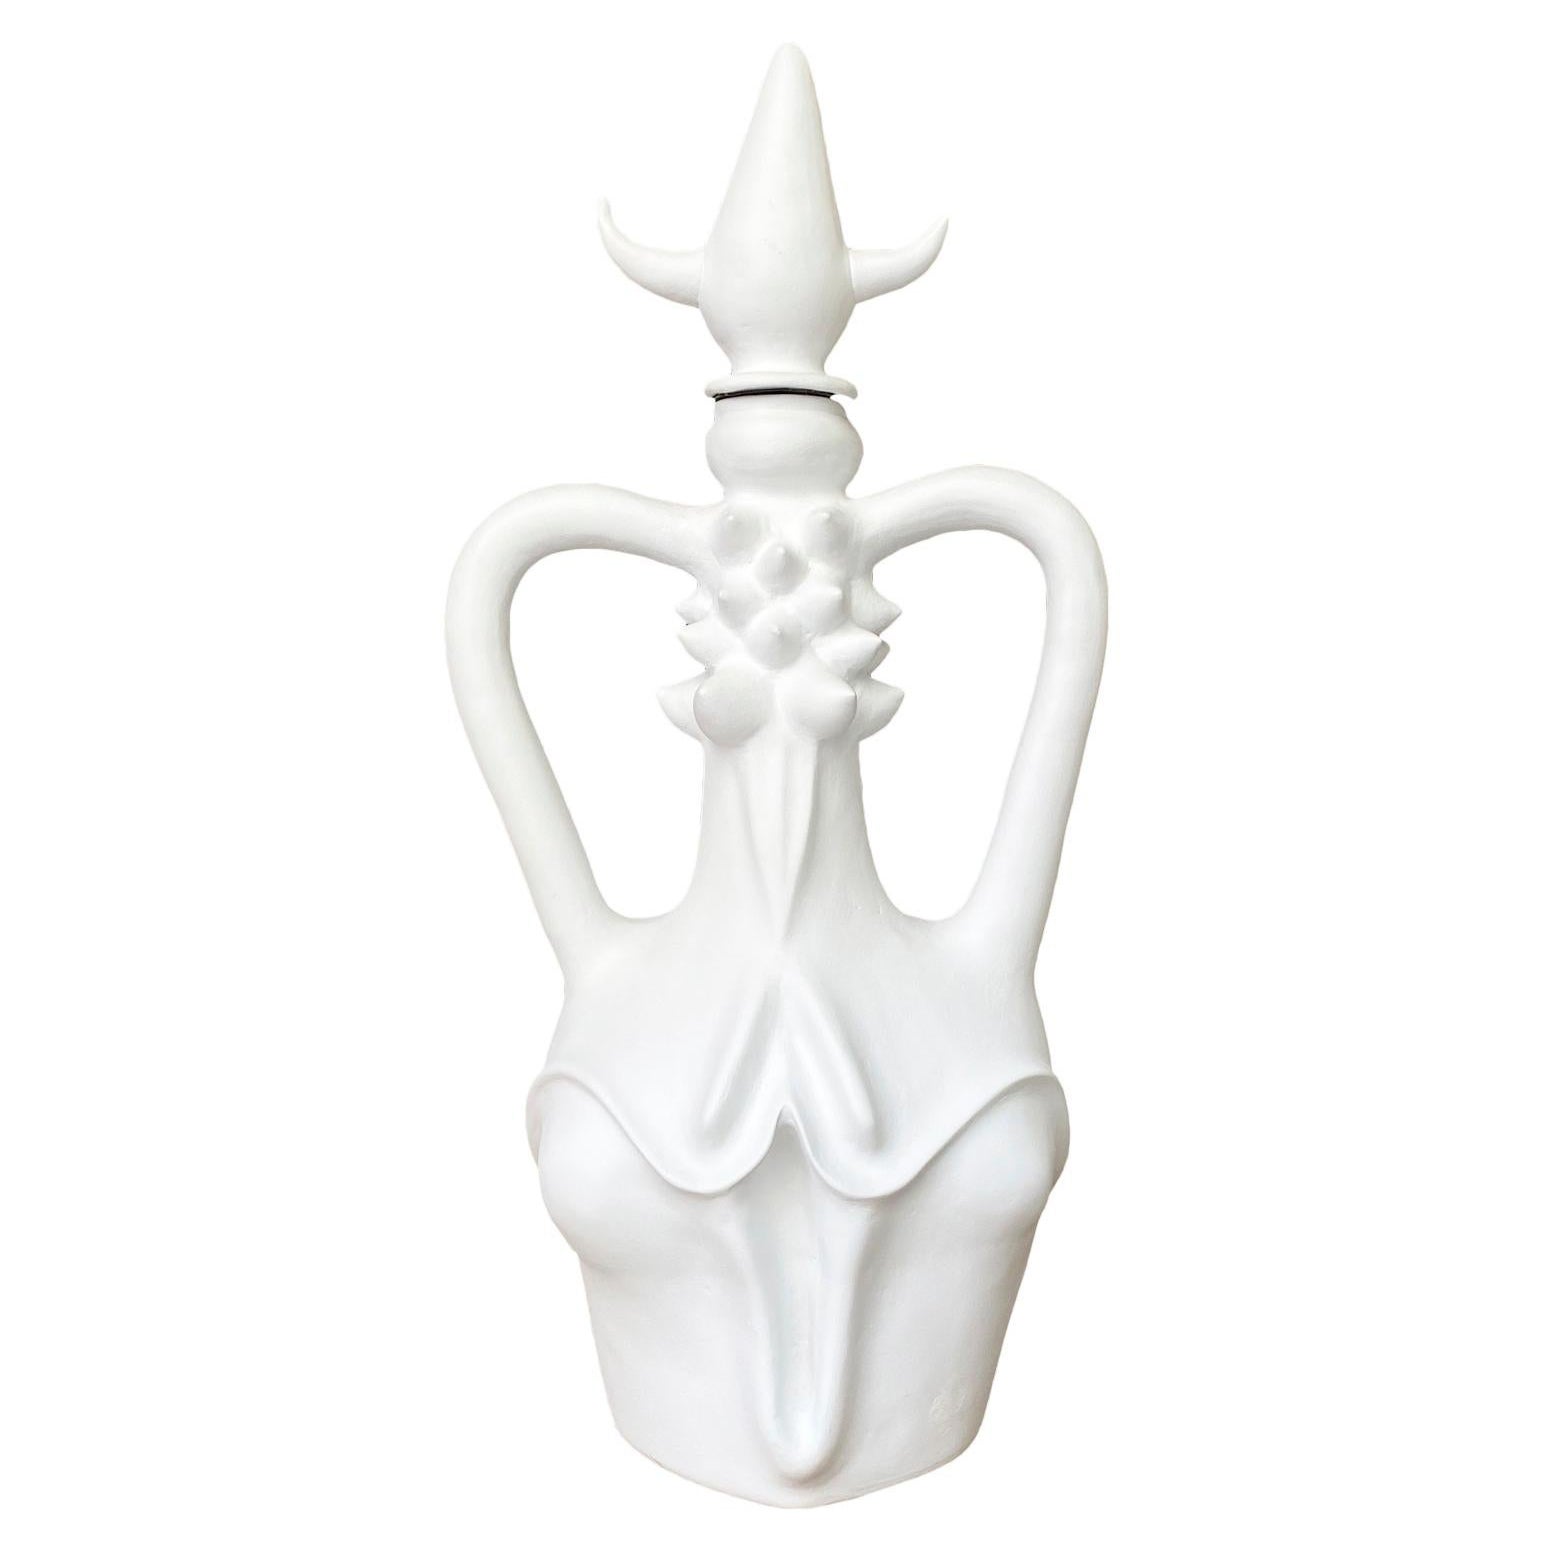 Amphora Sculpture with Vulva by Papin Lucadamo For Sale